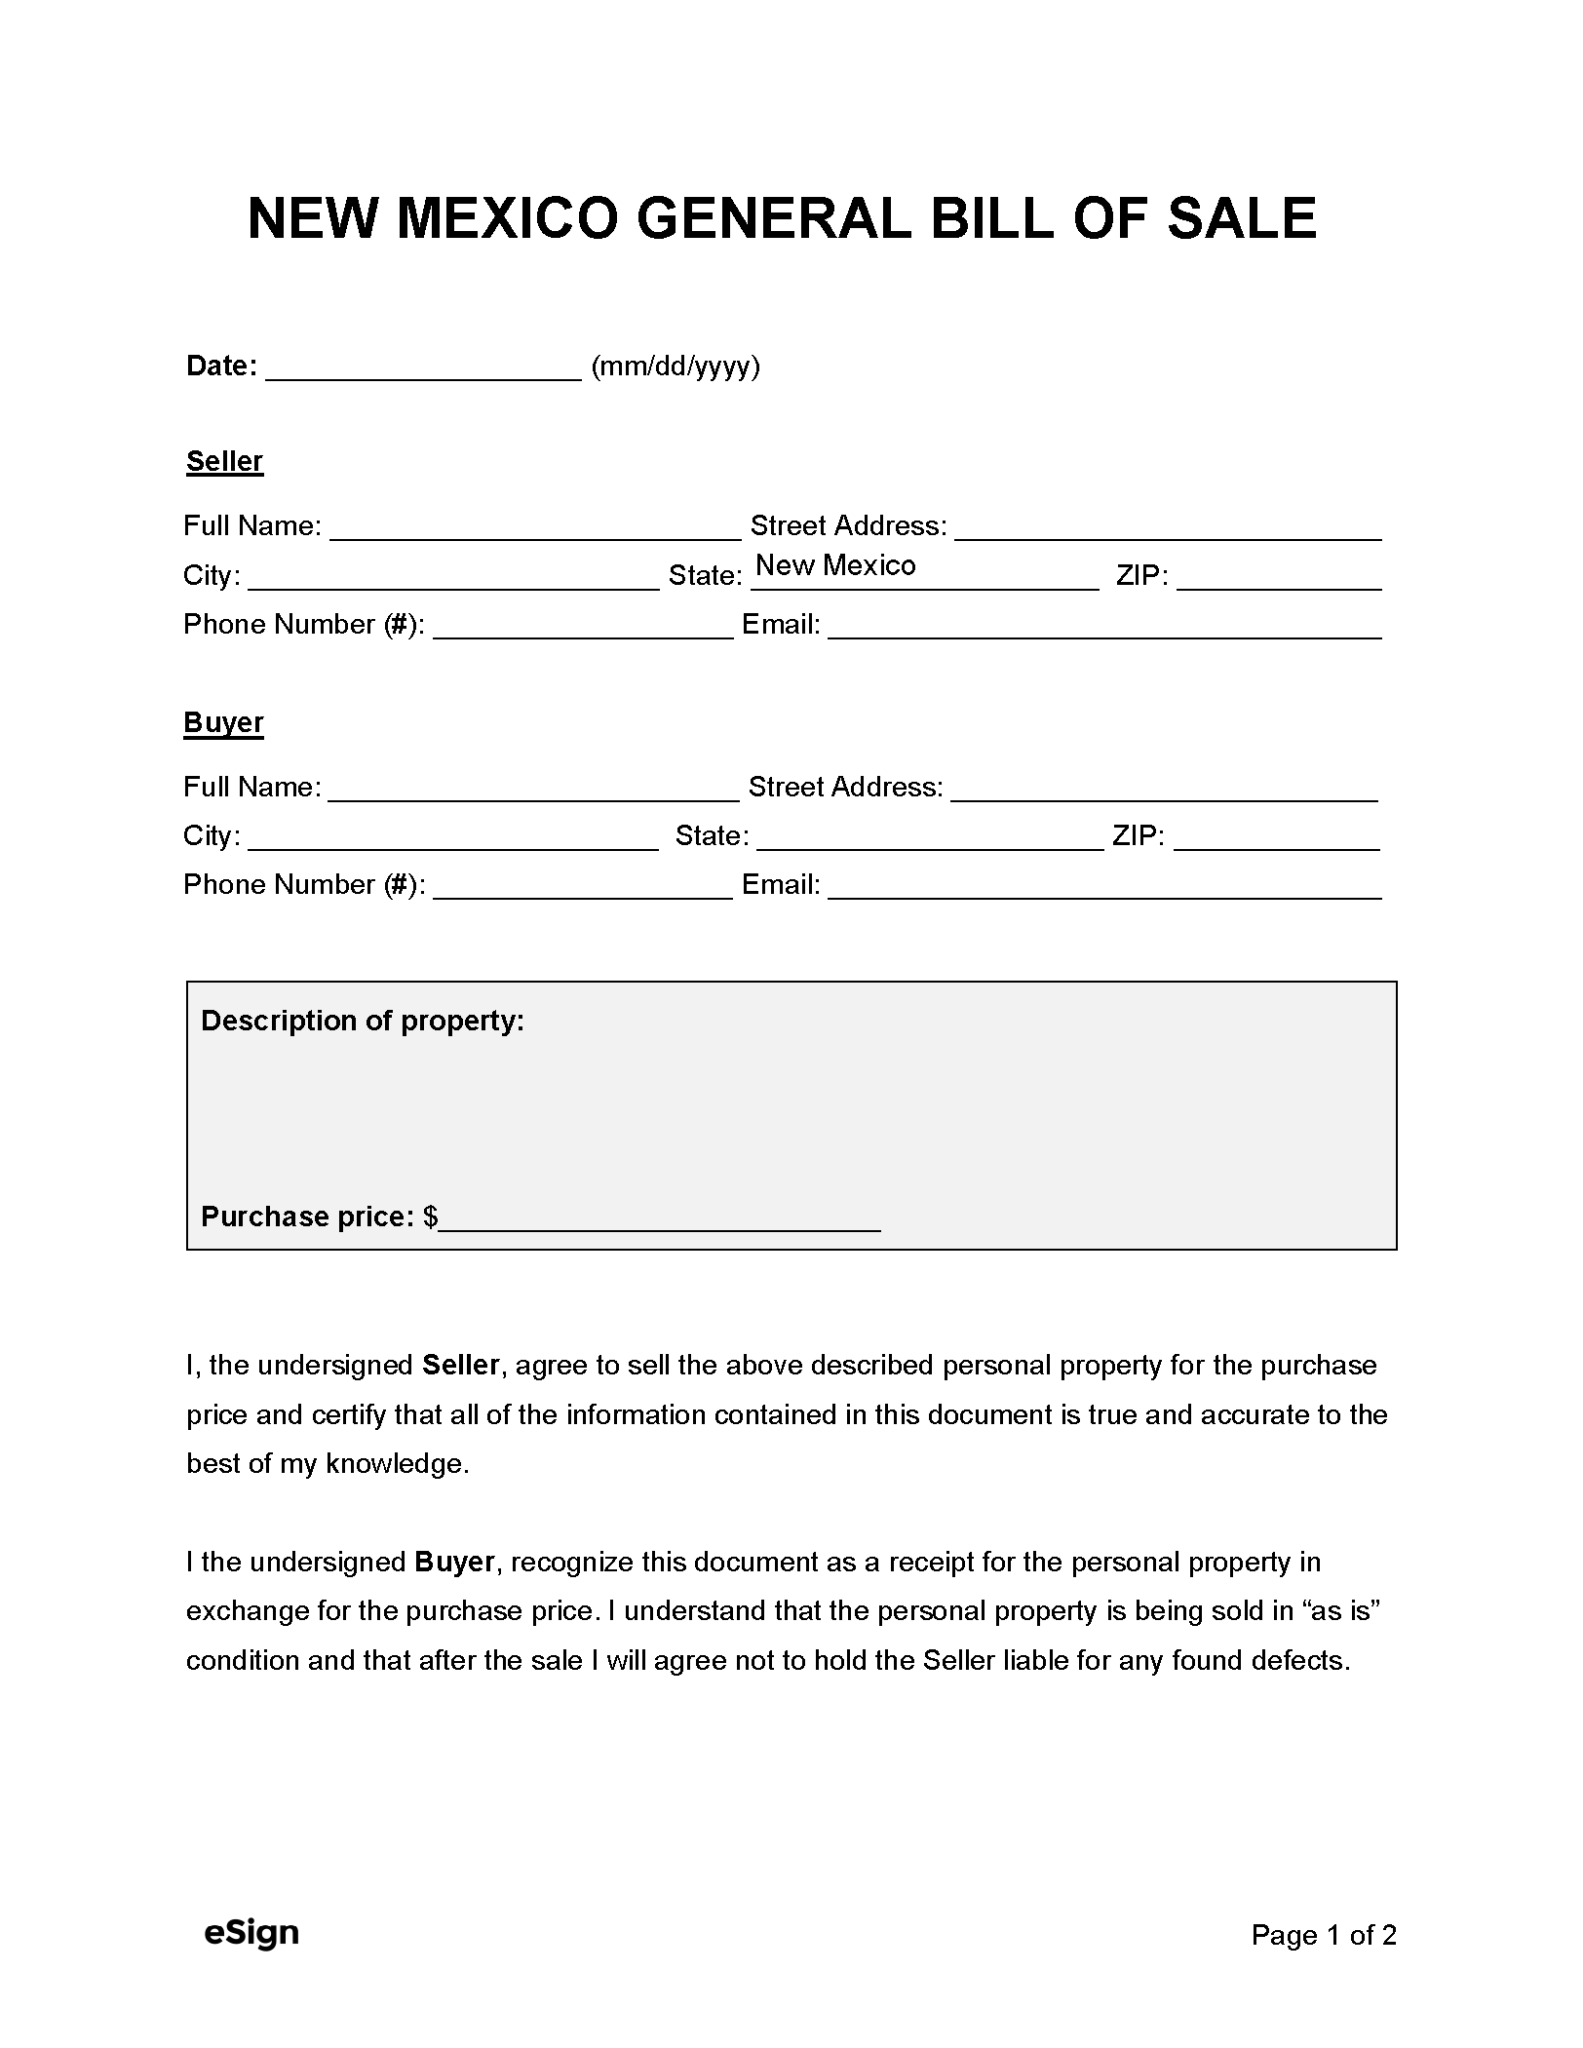 free-new-mexico-general-bill-of-sale-form-pdf-word